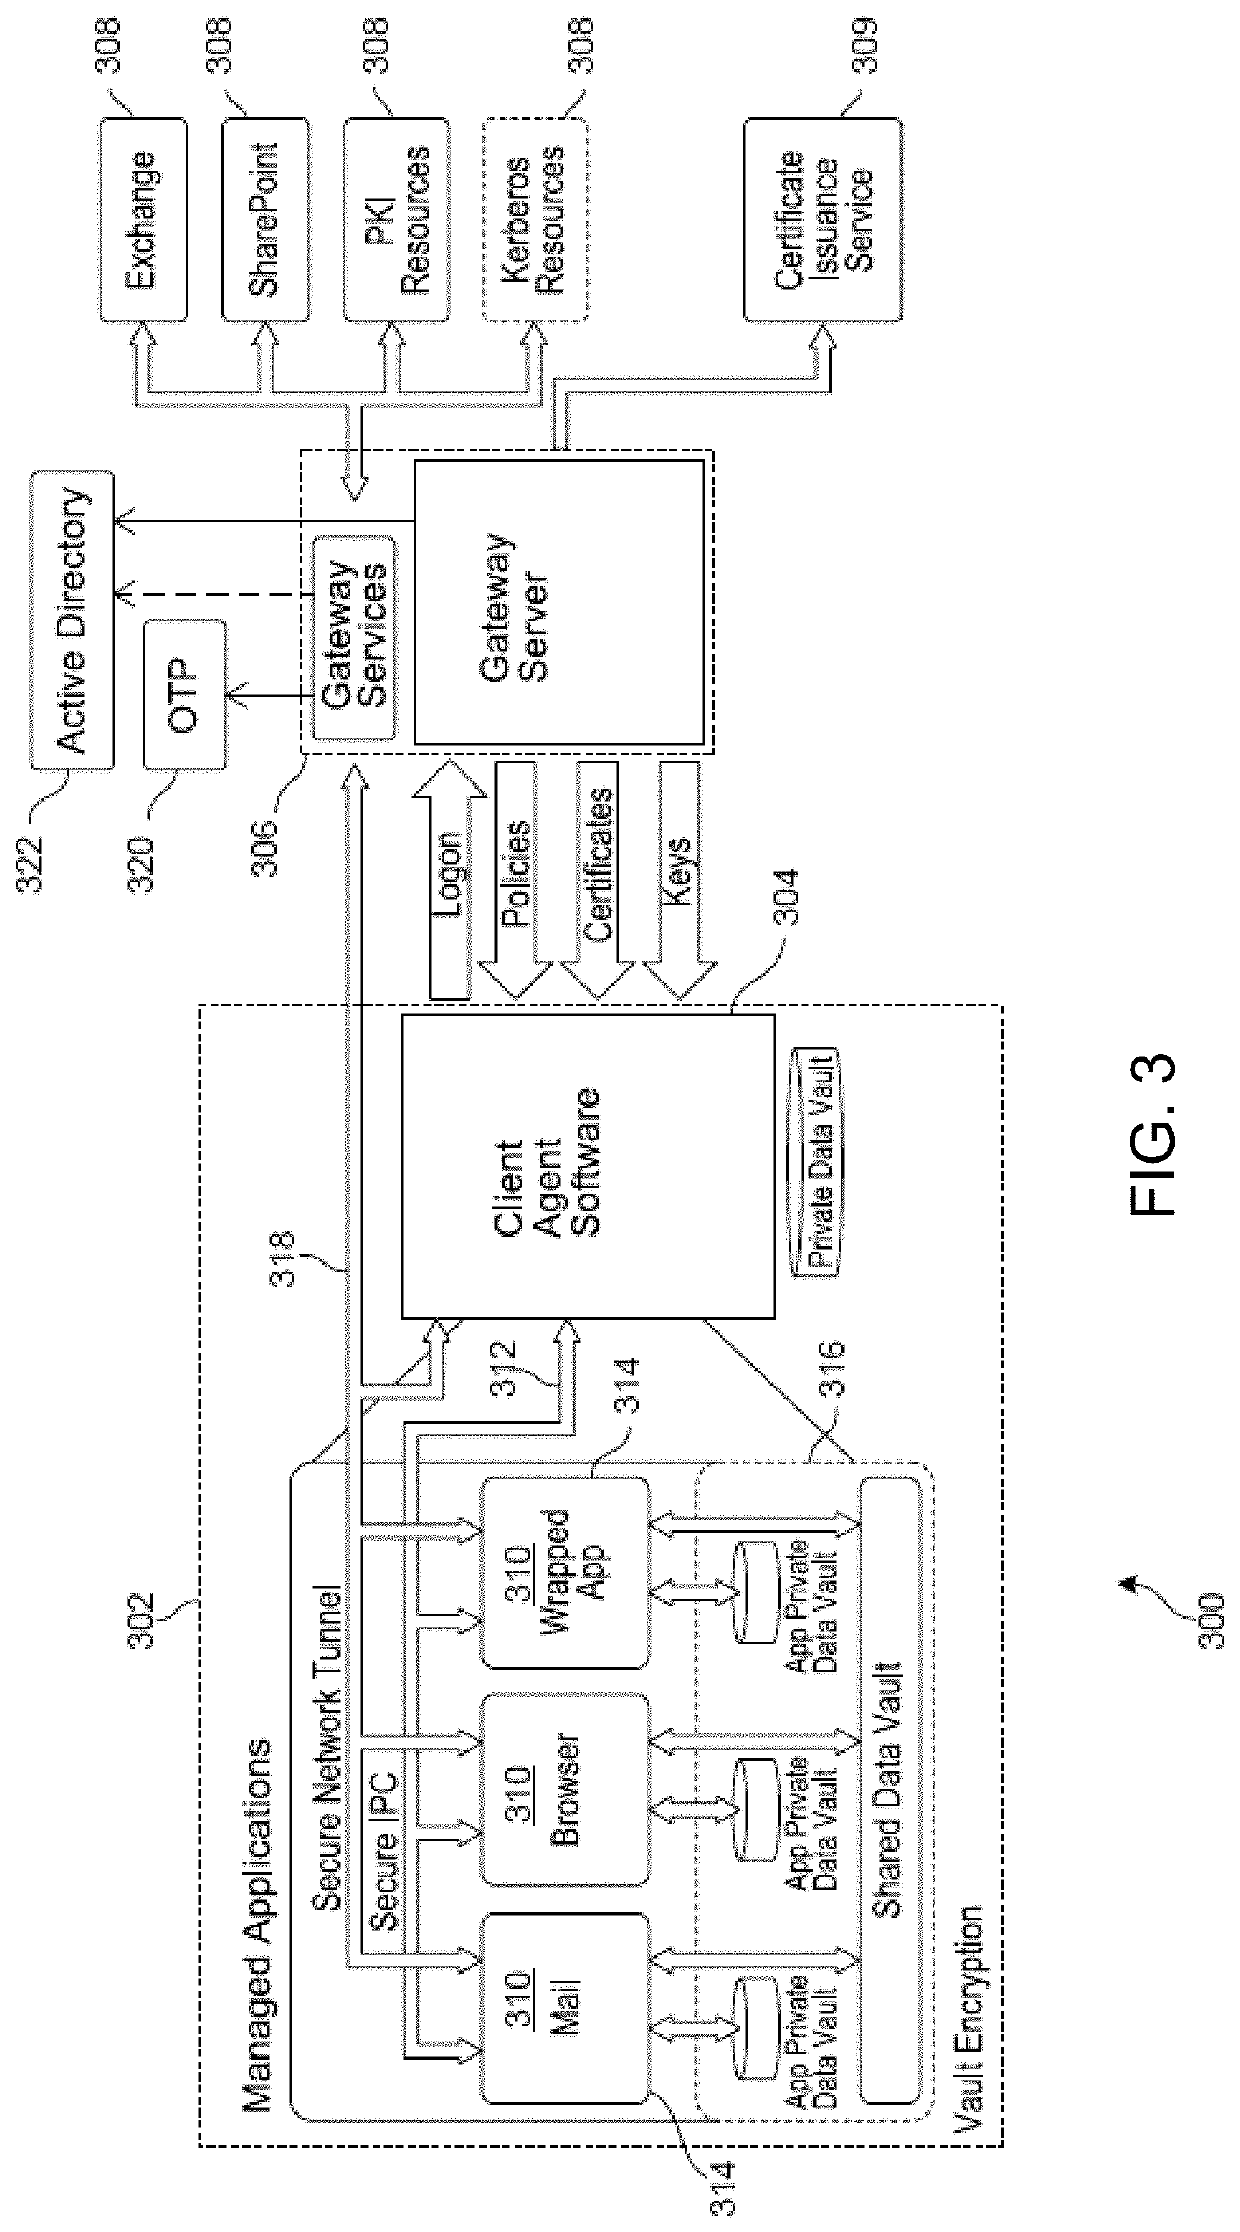 Systems and methods for presenting additional content for a network application accessed via an embedded browser of a client application